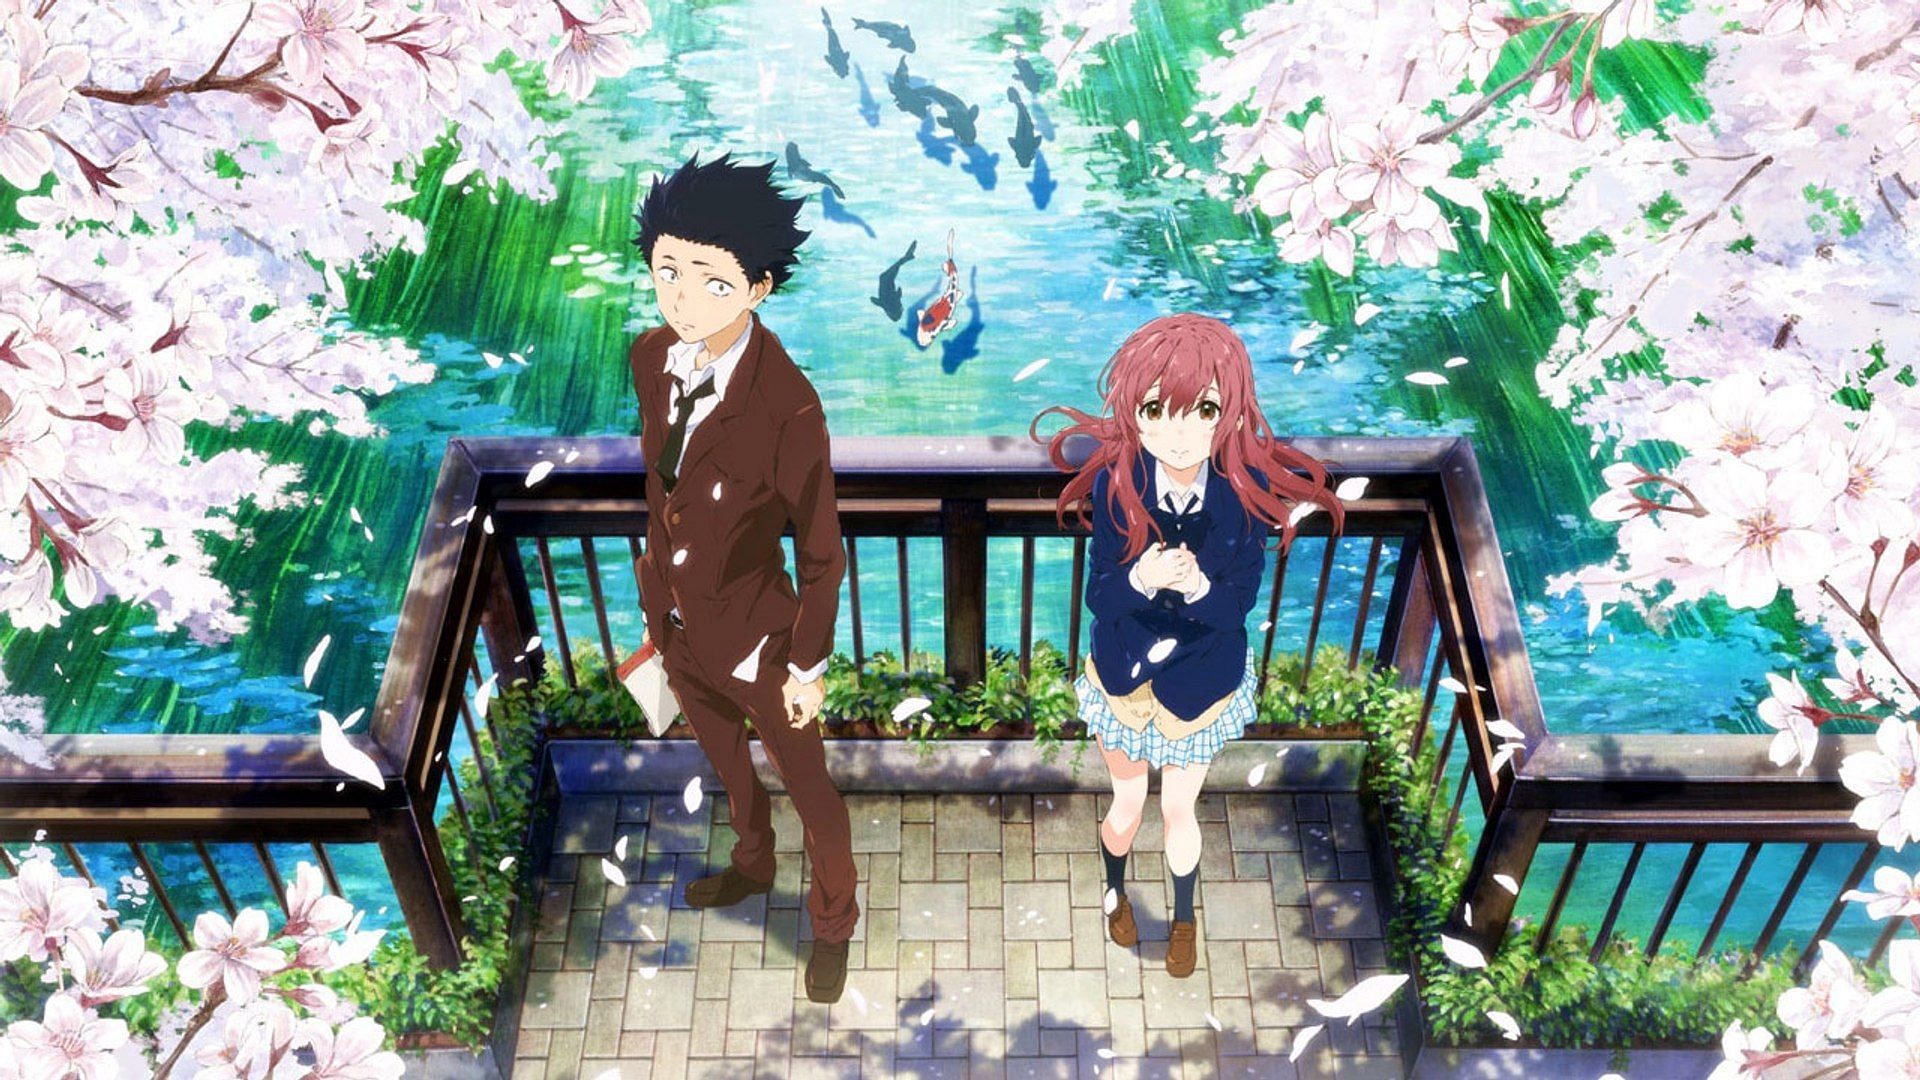 The two main characters in this anime film (Image via Kyoto Animation)